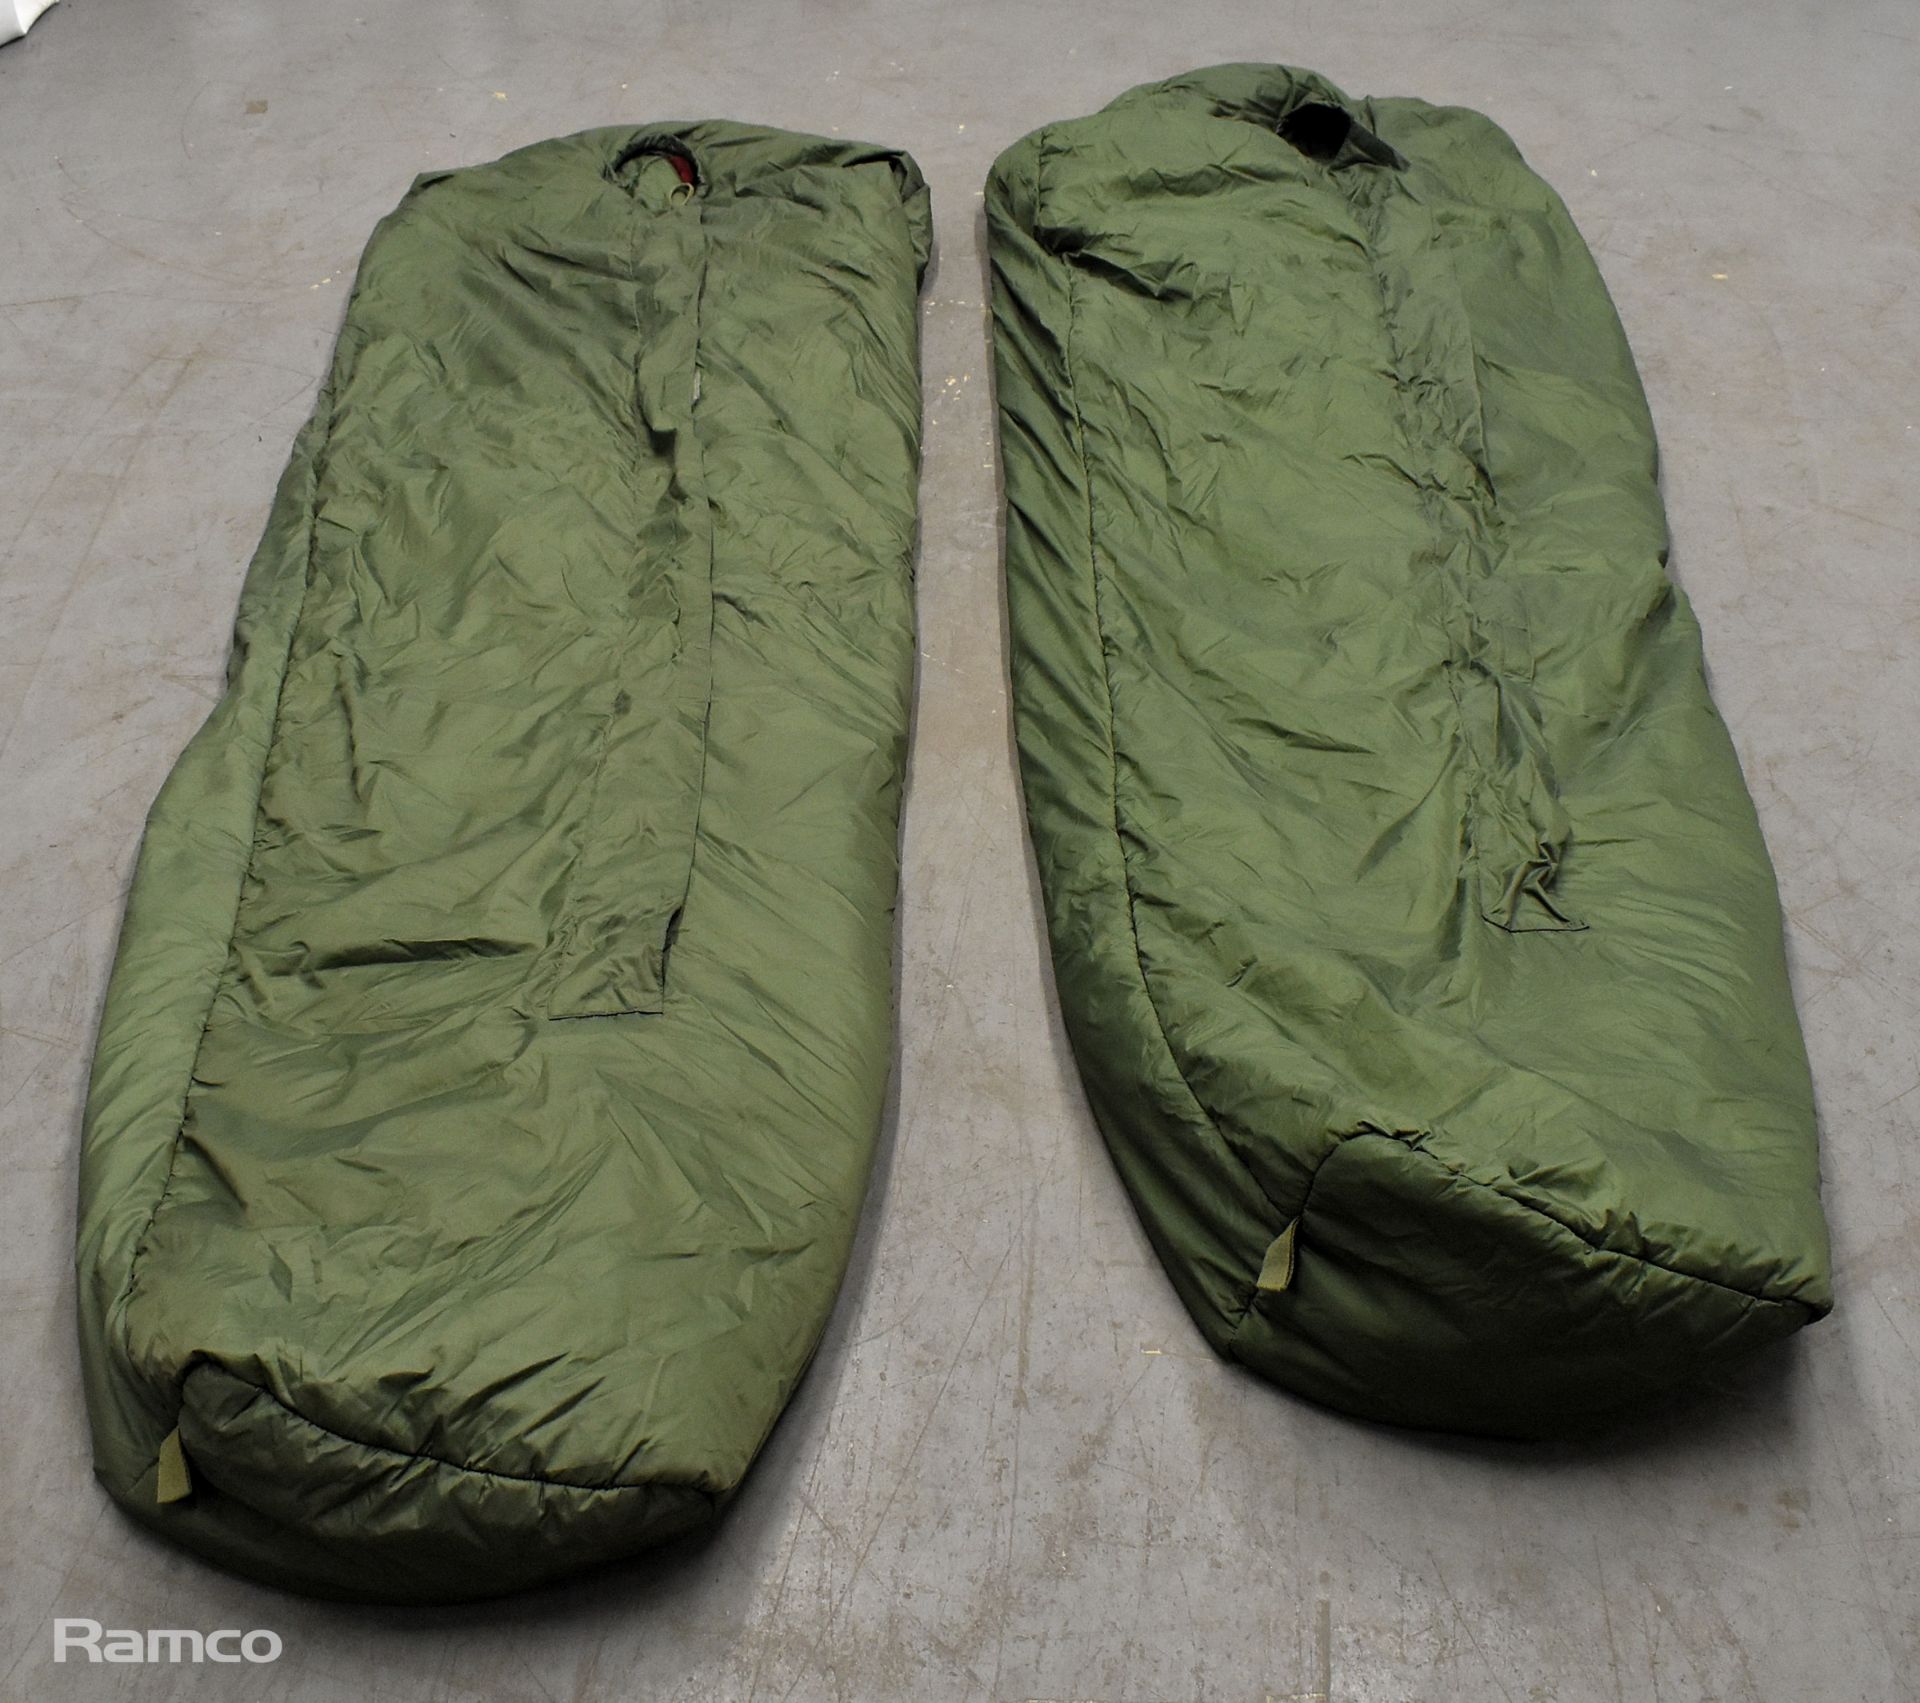 49x Sleeping bags - mixed grades and sizes - Image 4 of 8